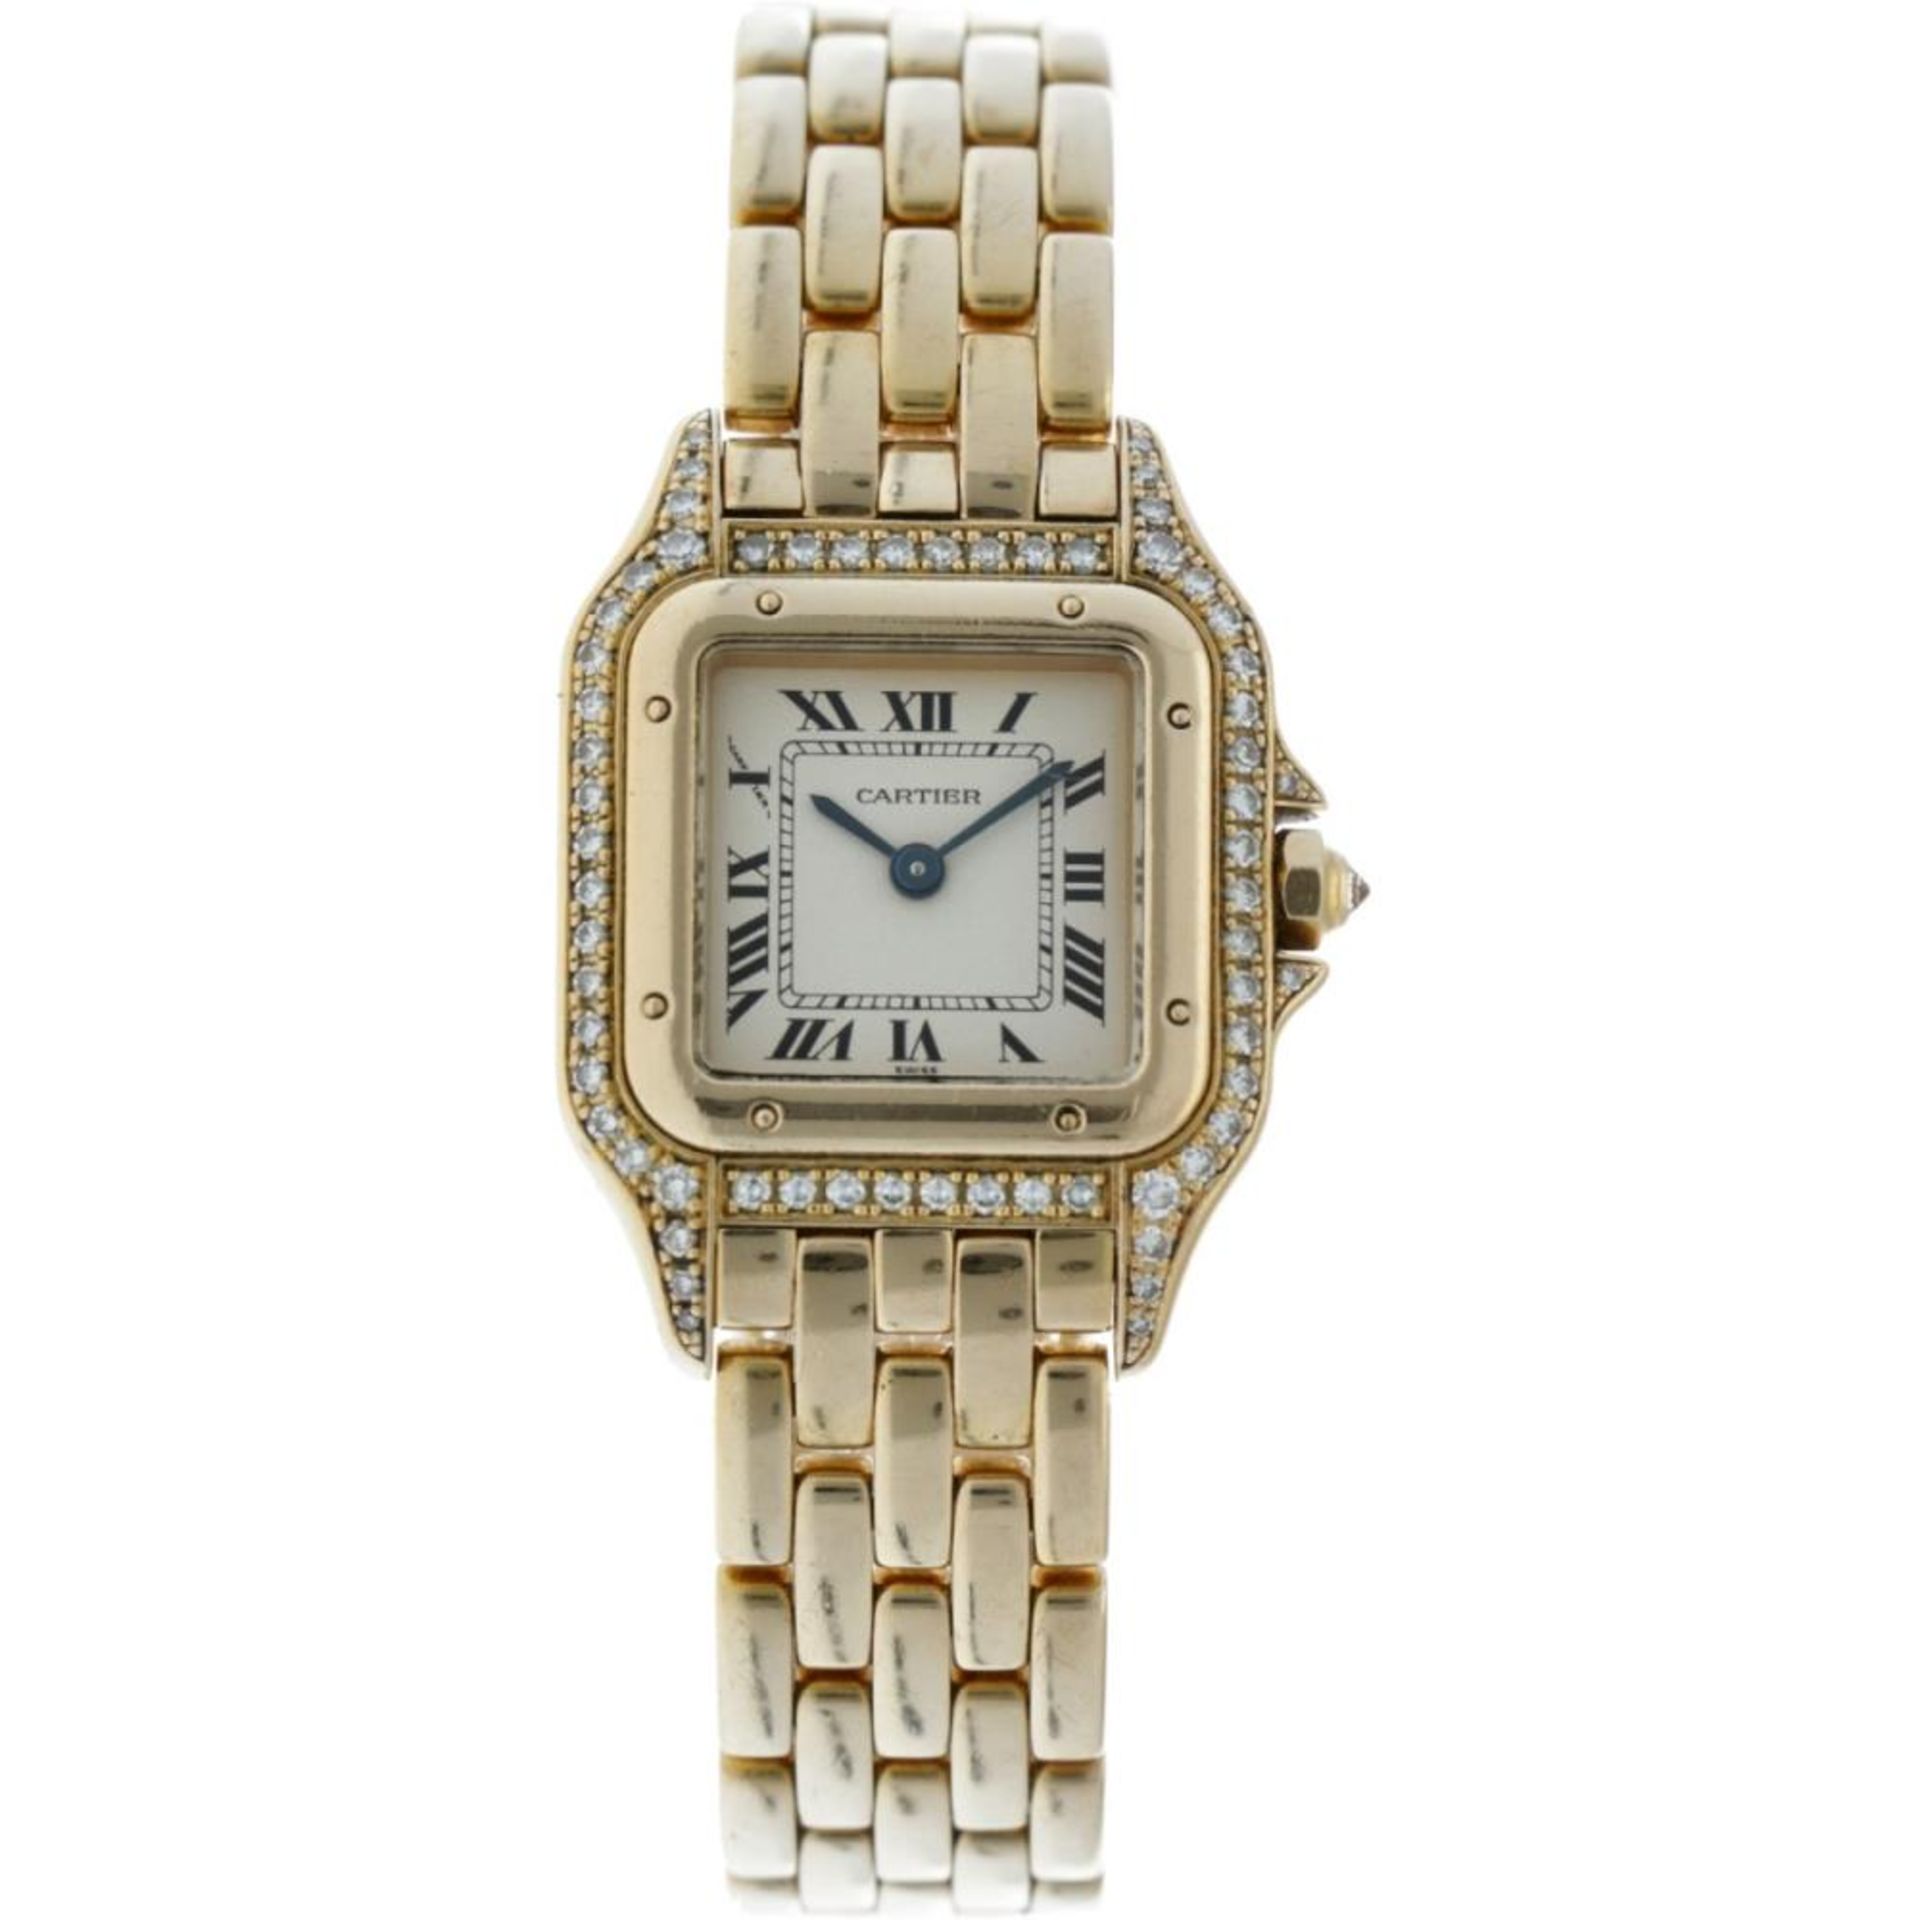 Cartier Panthere 1280 - Ladies watch - approx. 1995.